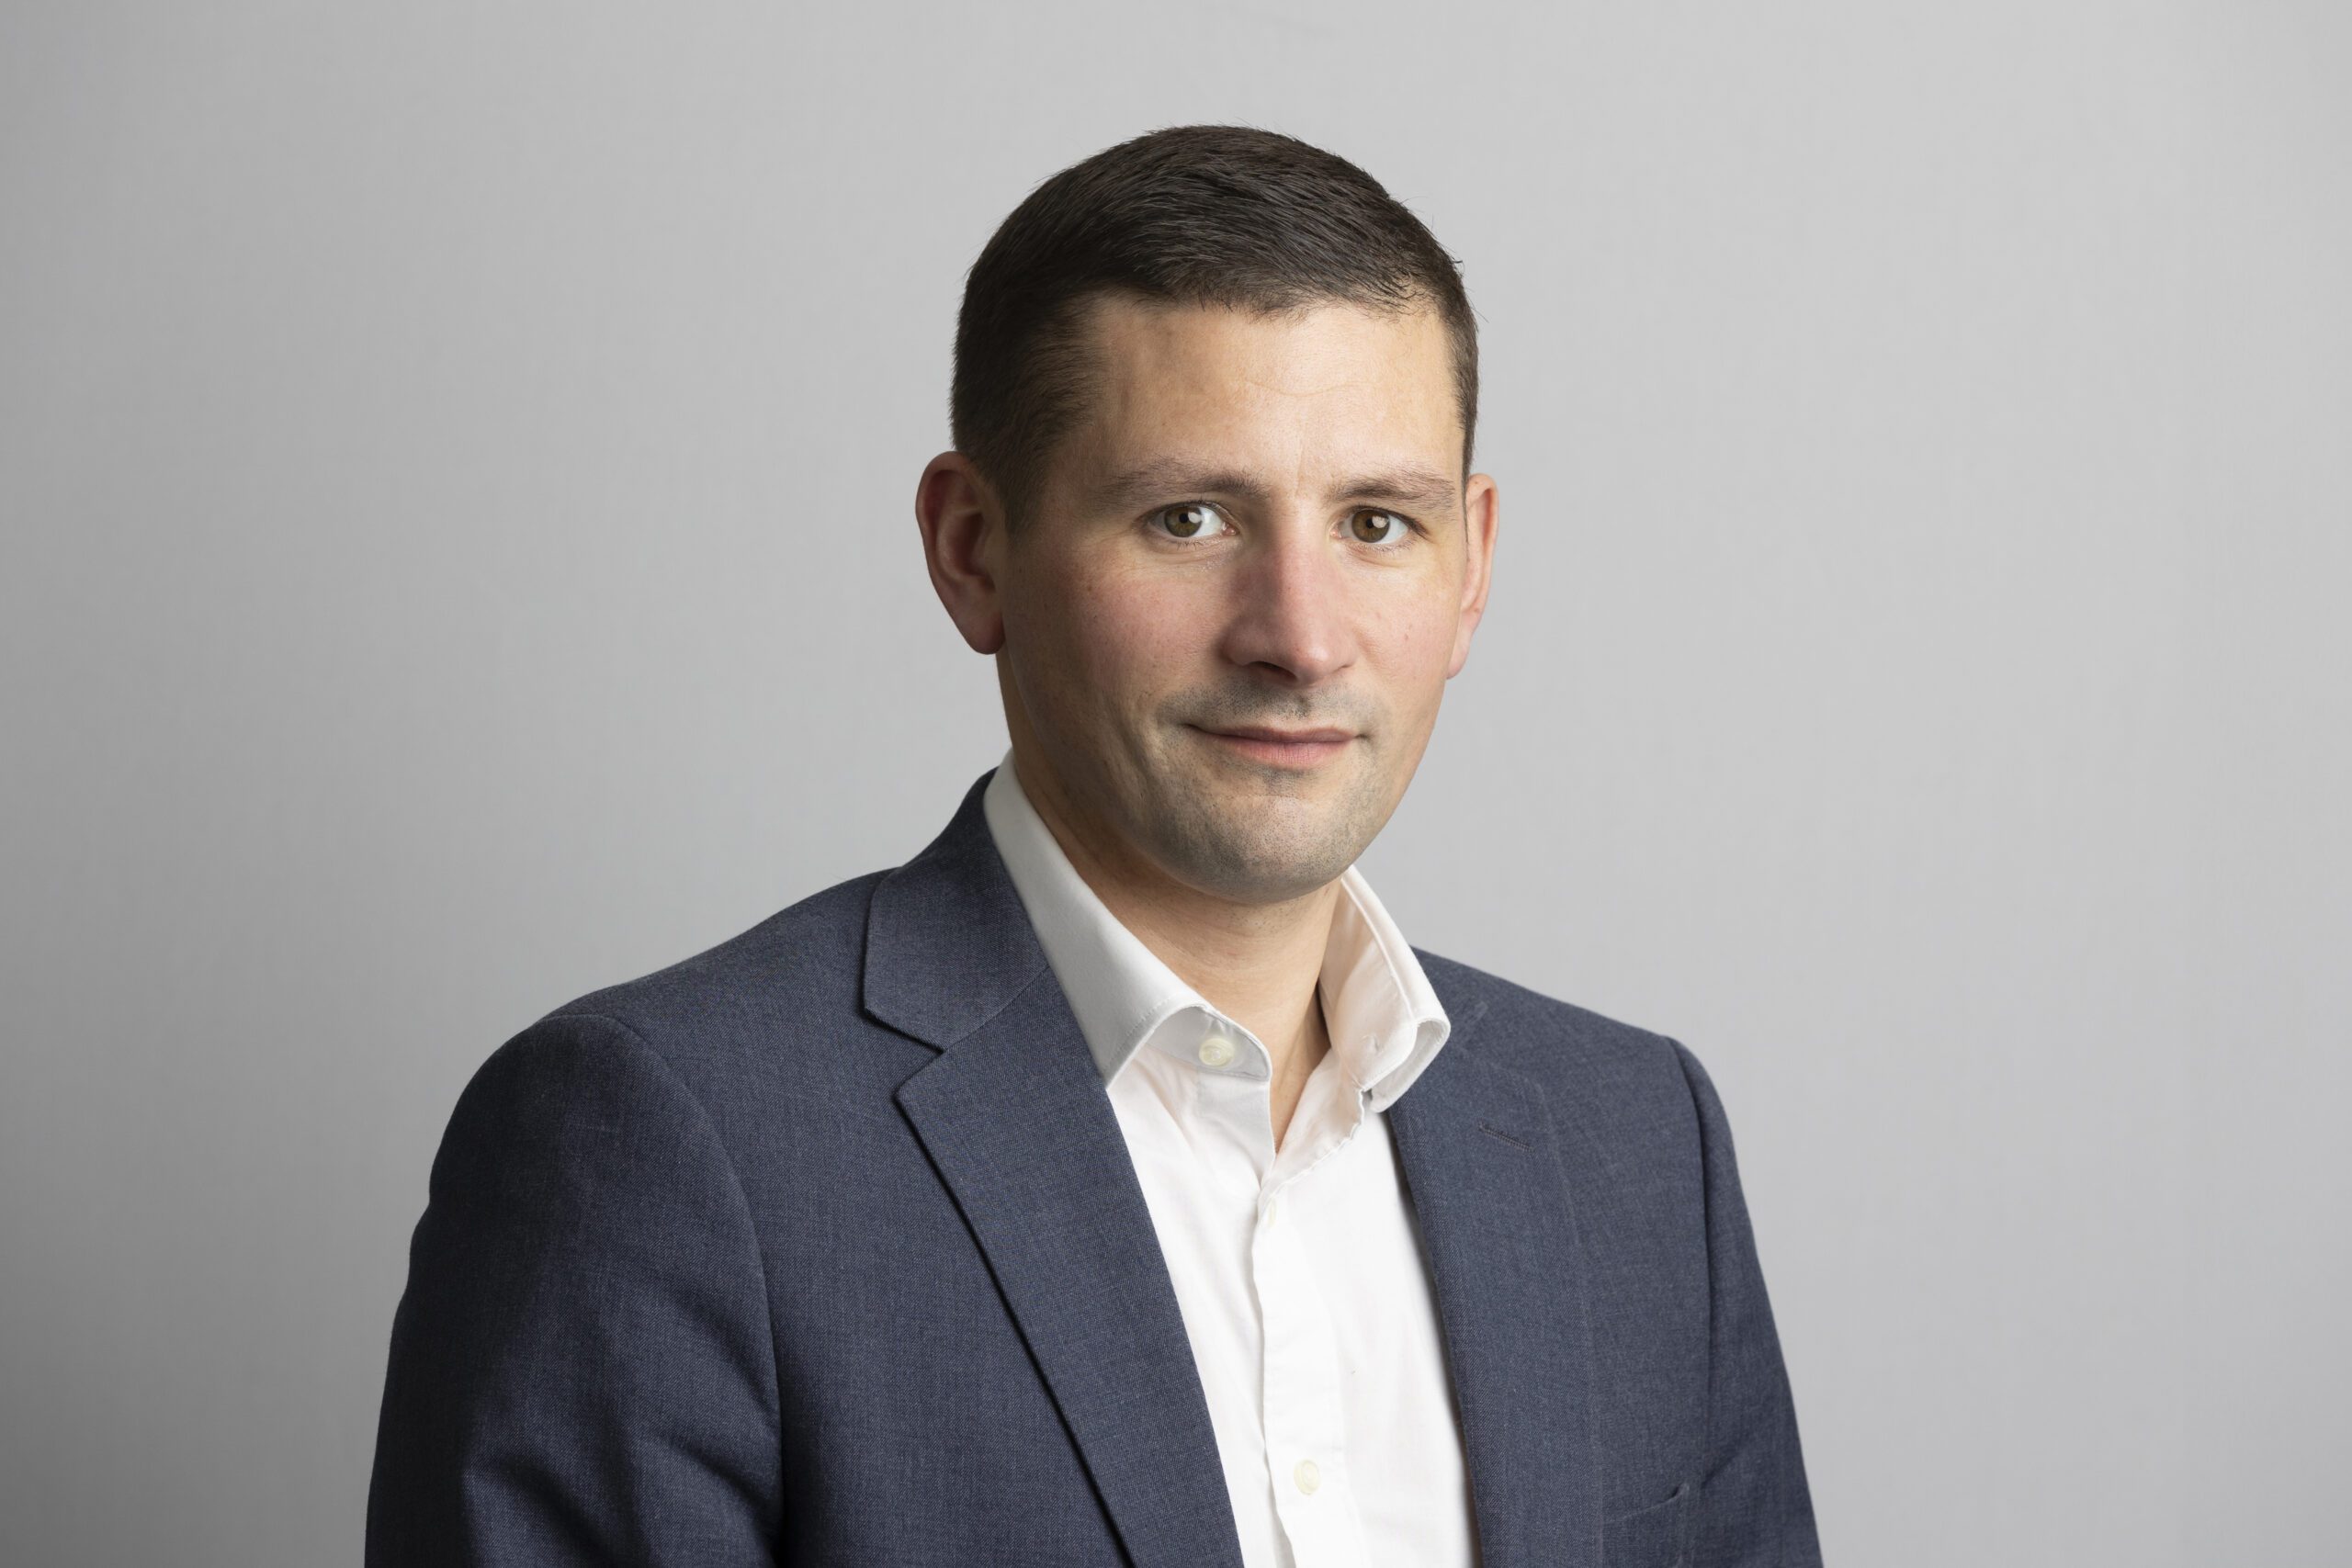 Chartway appoints Adam Forster as Head of SFR